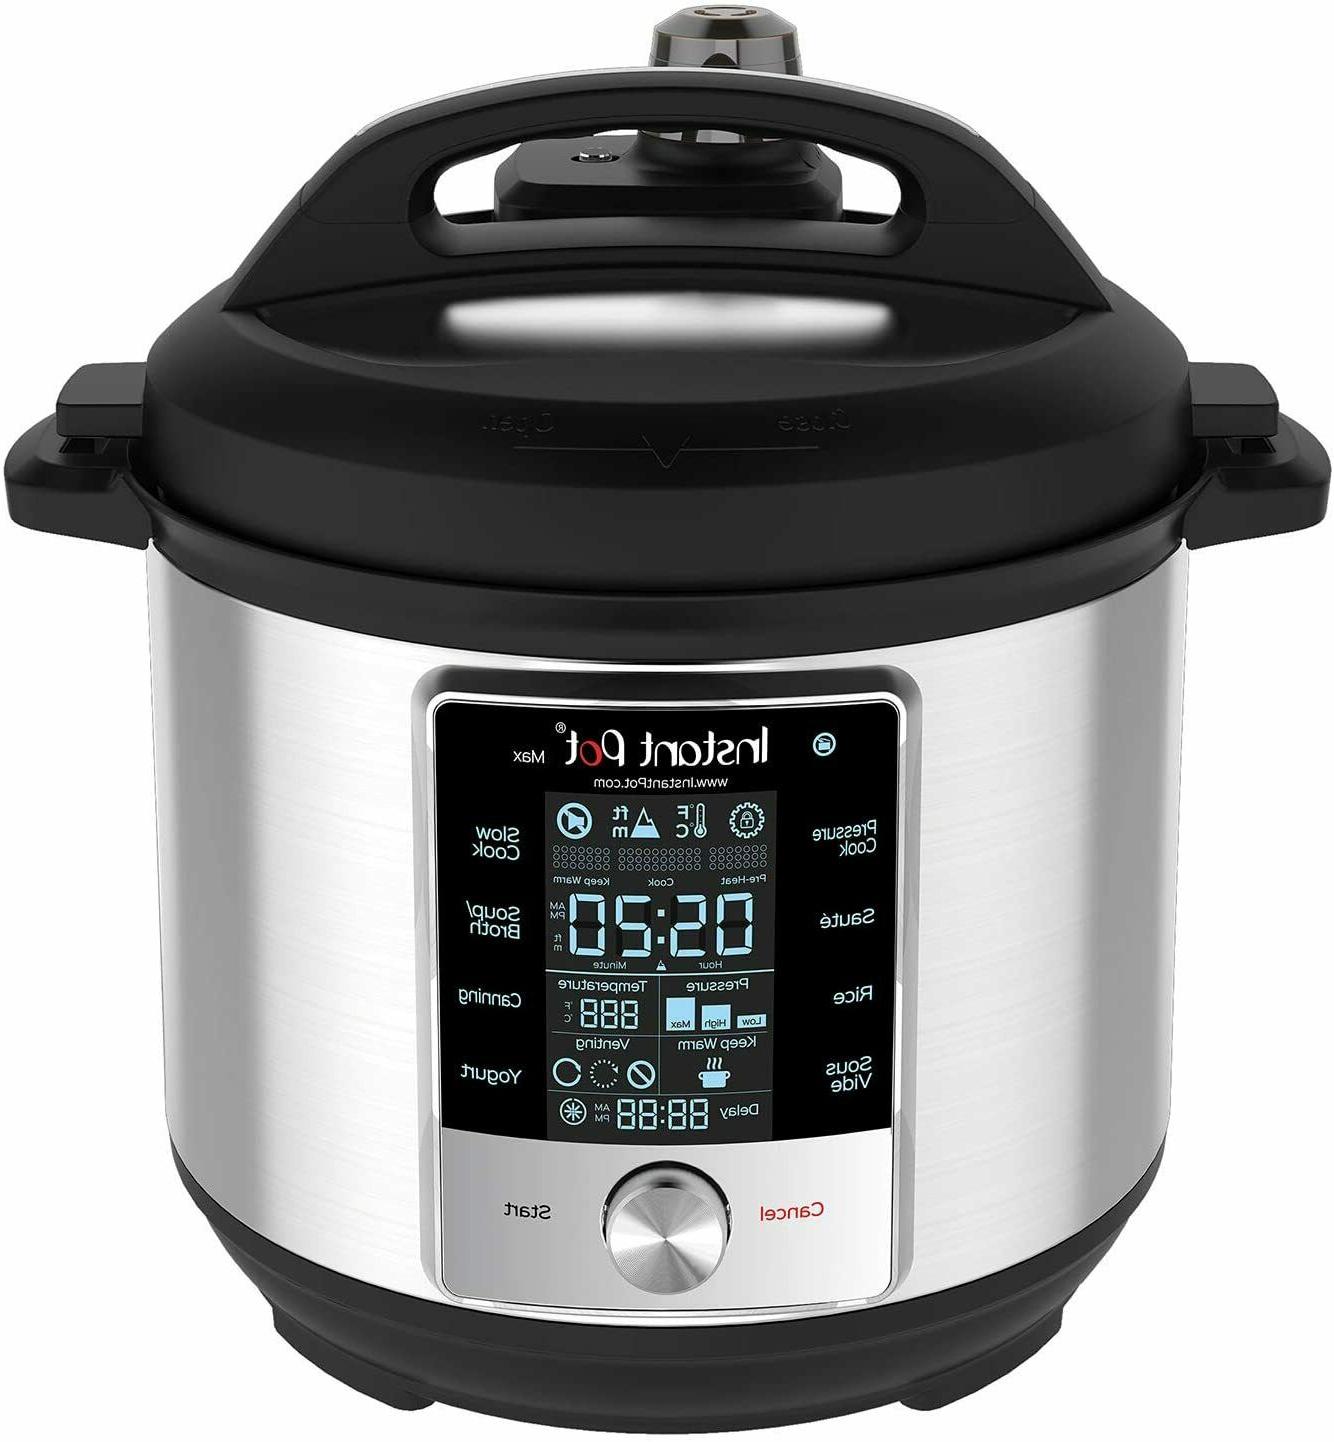 Top 10 Latest Instant Pots For Home Use - Techyv.com